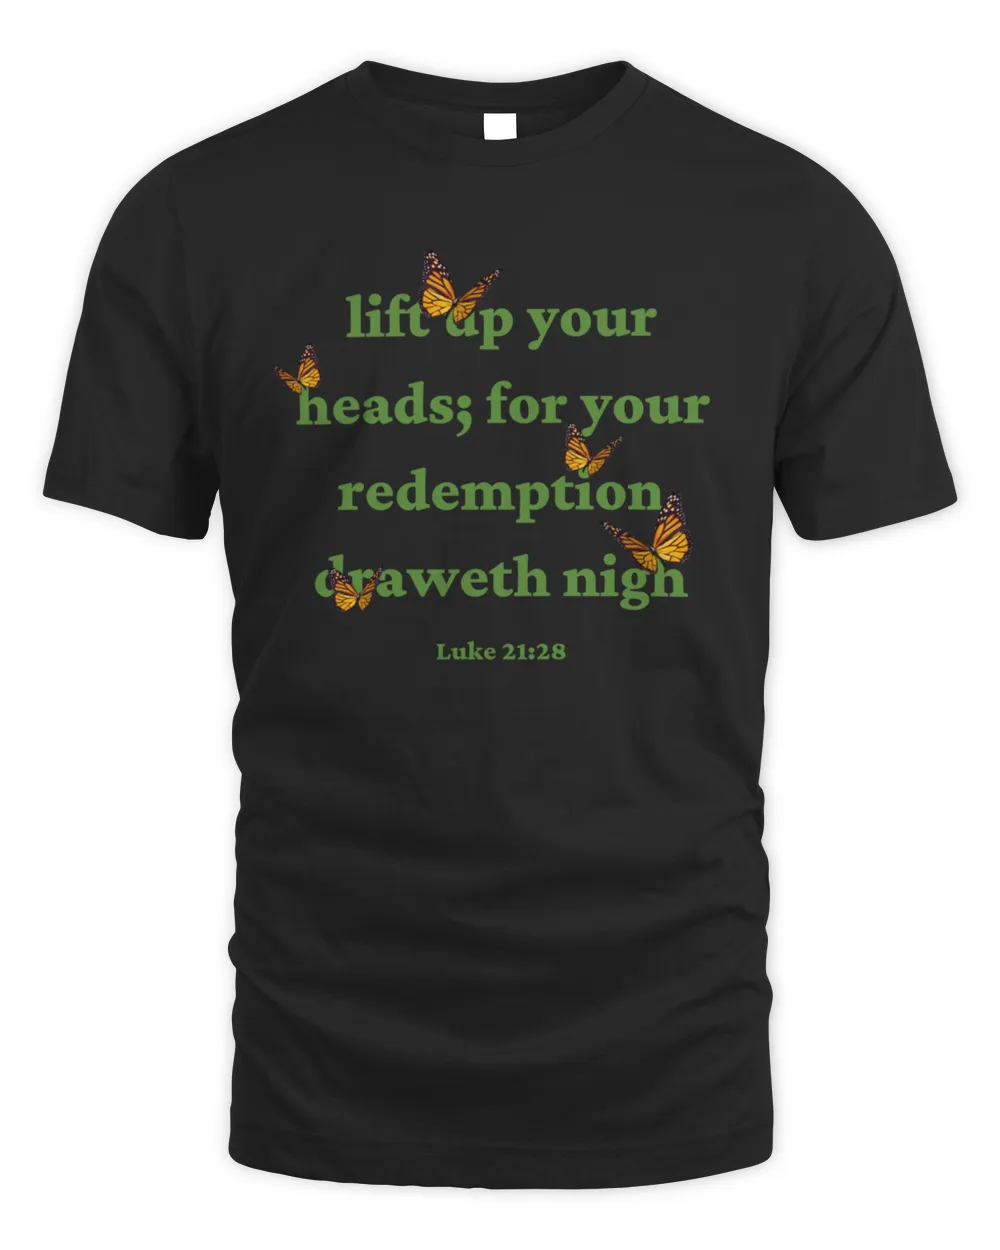 Life up your heads for your redemption draweth nigh Luke 2128 Bible verse with monarch butterflies7284 T-Shirt